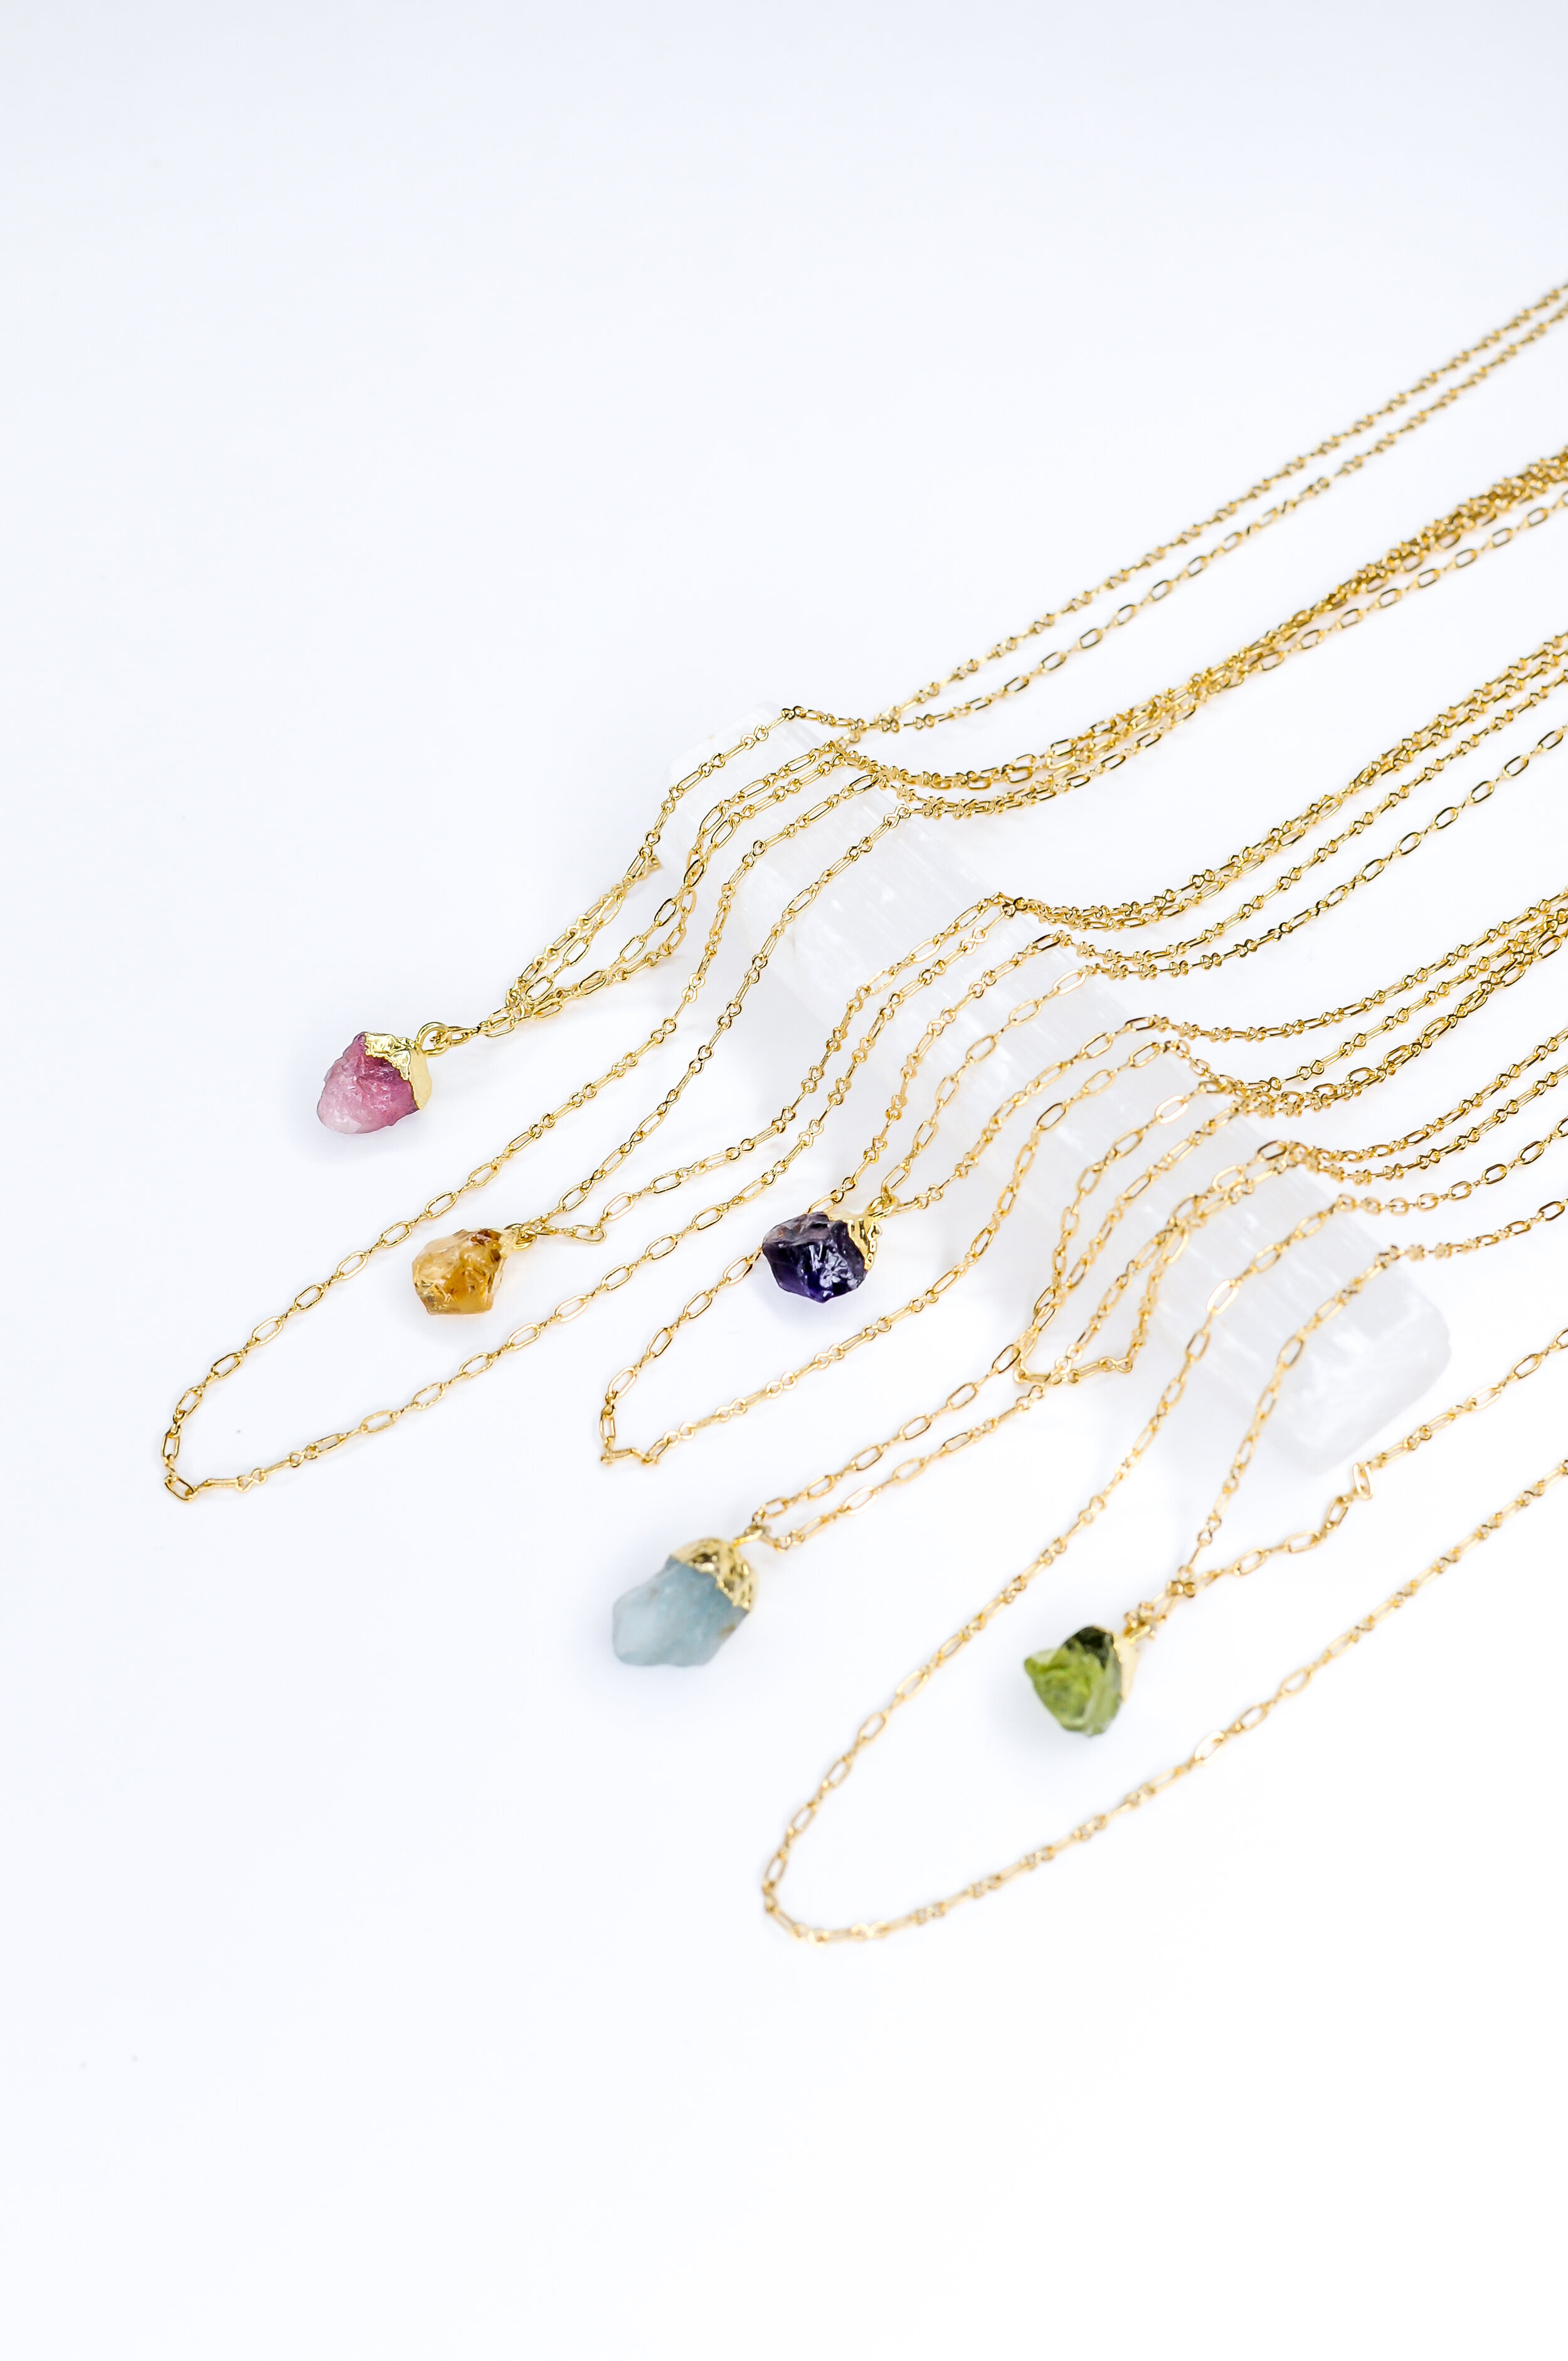  Earth Stoned, Raw Gemstone Necklace, Long Outer Layer  38.00  Small but mighty.  Which stone speaks to you?  Which stone will support someone you love?  This necklace comes in 2 versions: Longer outer layer, where the natural gemstone dangles above 